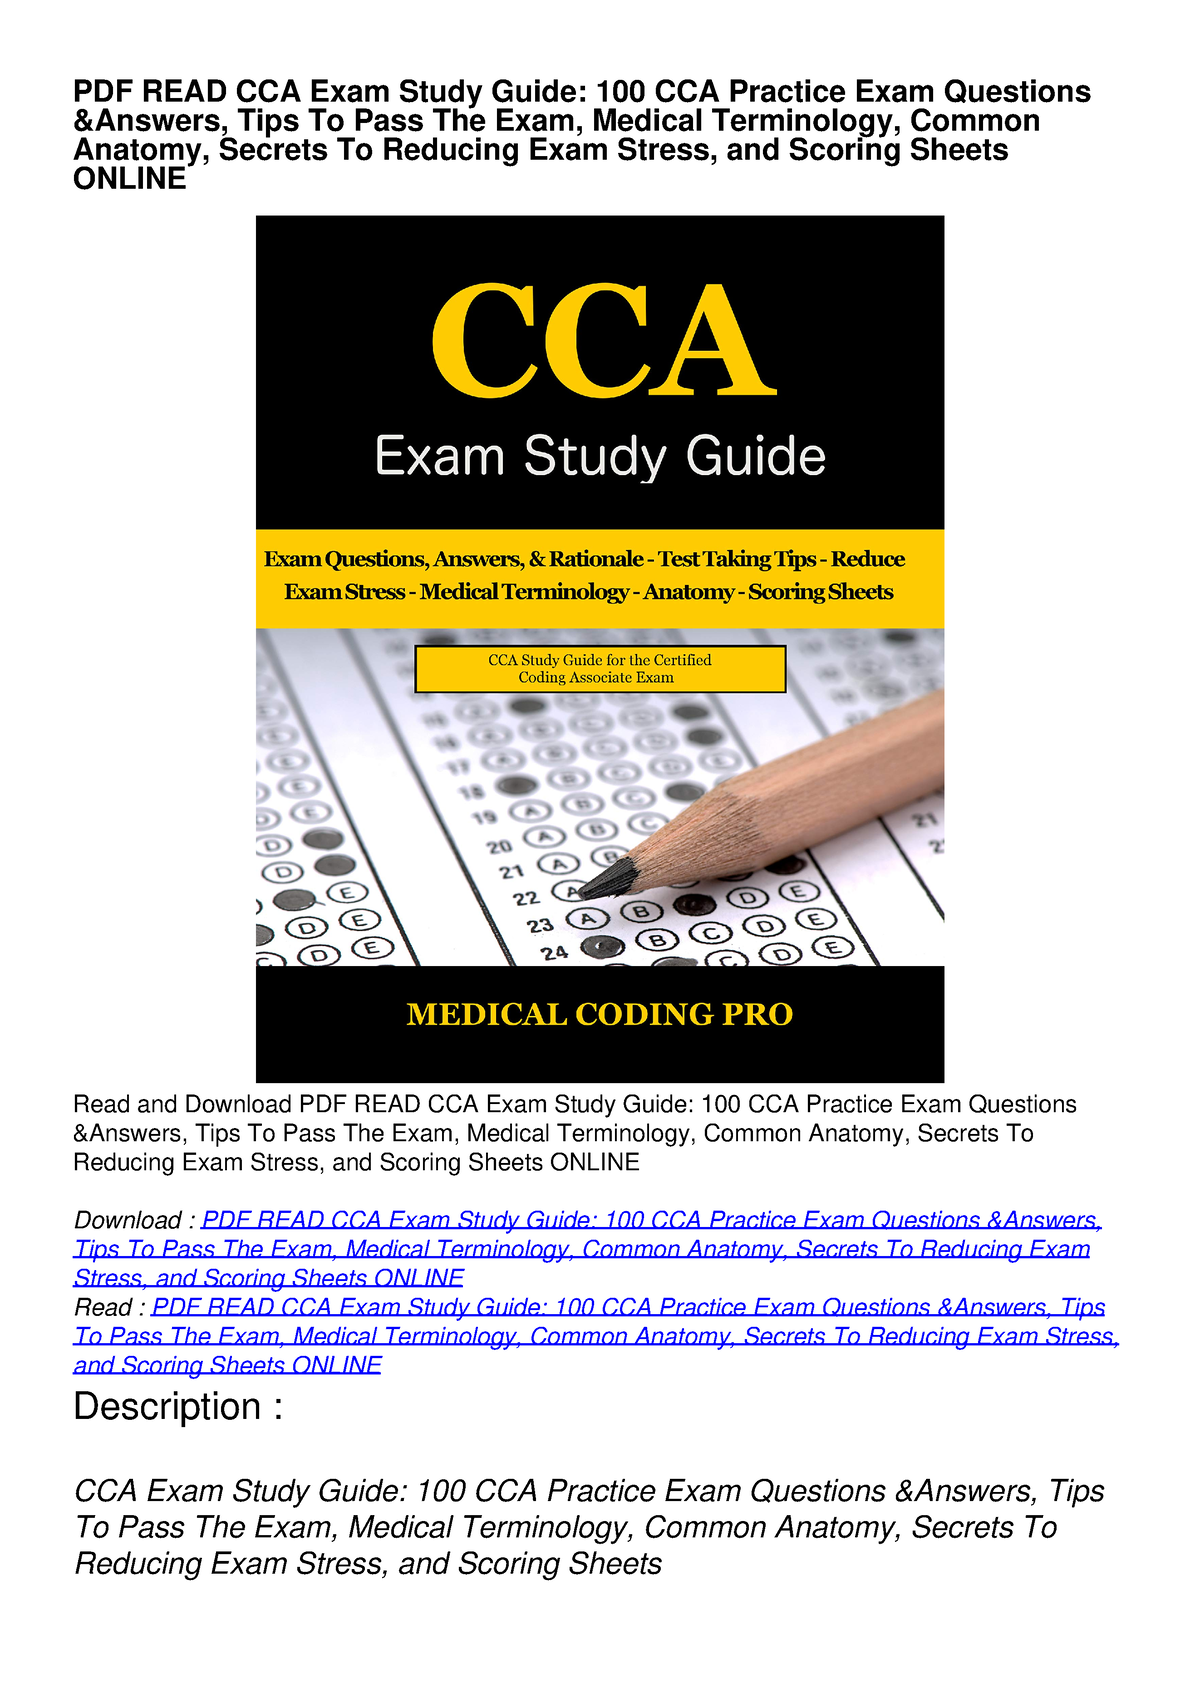 PDF READ CCA Exam Study Guide 100 CCA Practice Exam Questions Answers